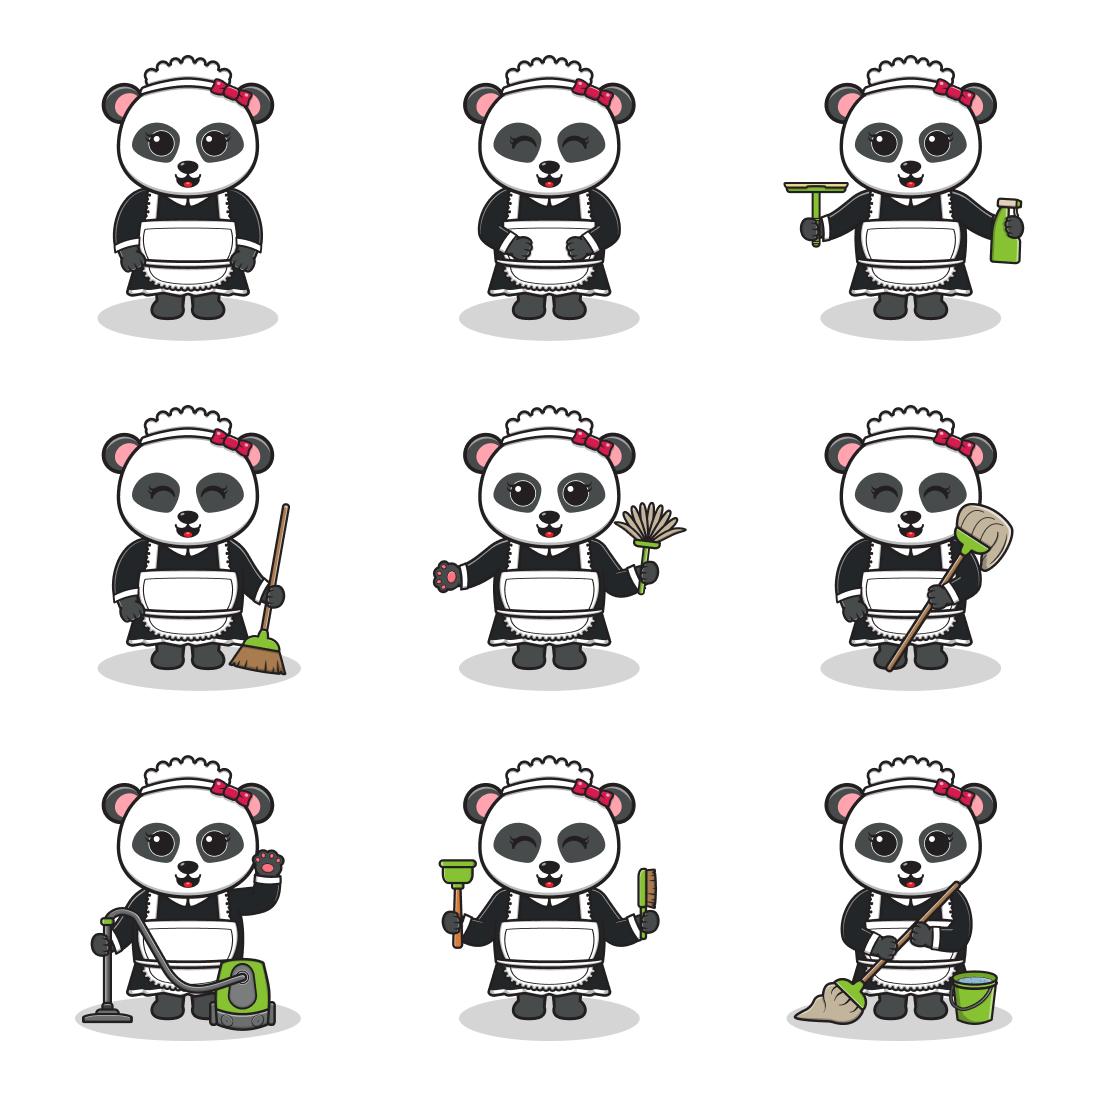 Set of cartoon pandas with different outfits.